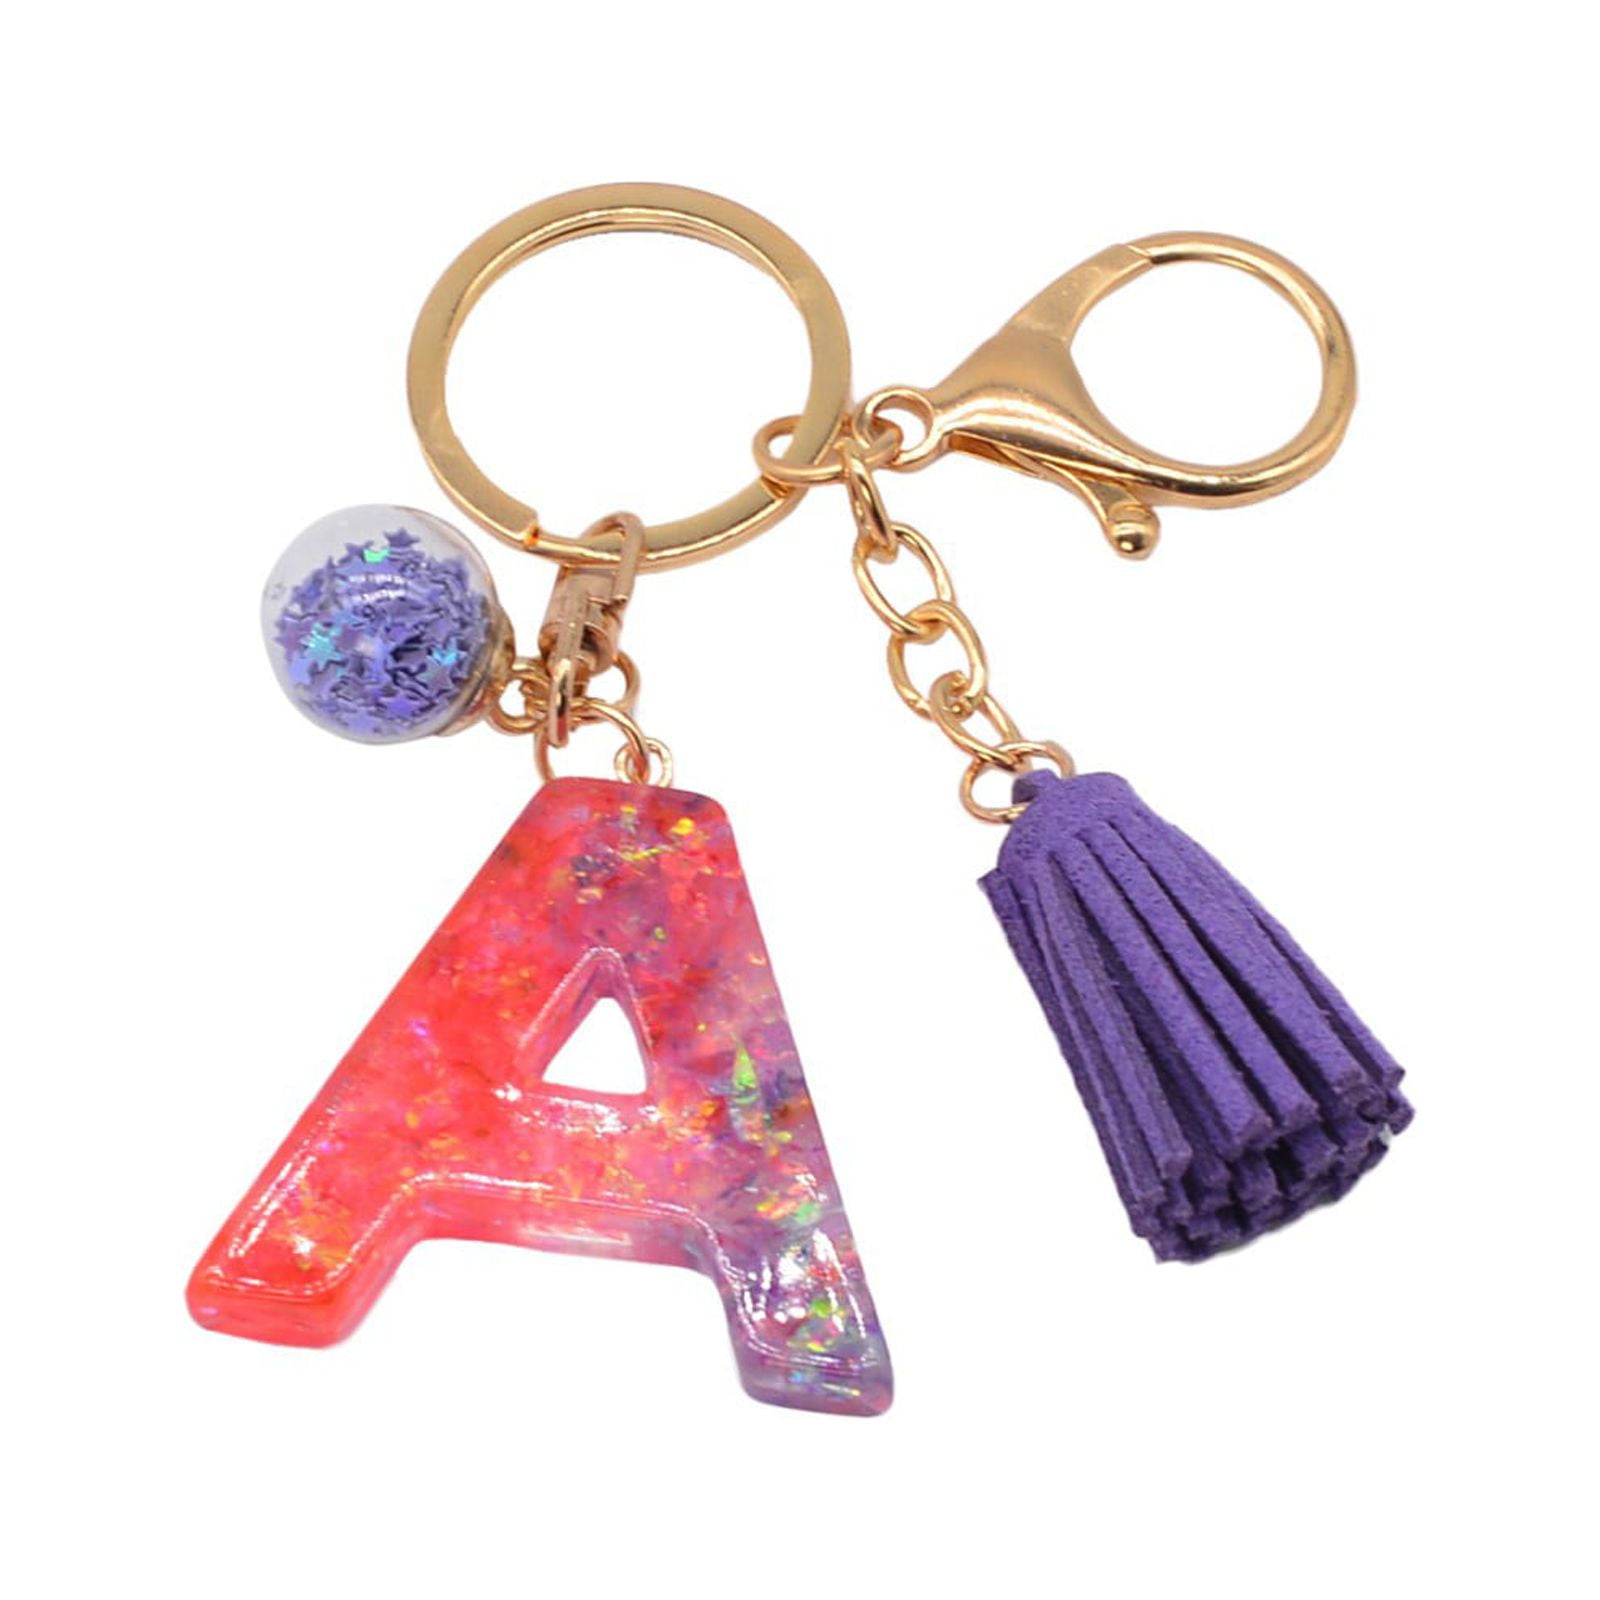 Crafty Angel Art E - Letter - Initial Resin Keychain Aqua solitd Color with Shimmering Mix of Glitter on The Front with Pearls Along with A Décor of Cow Head Along